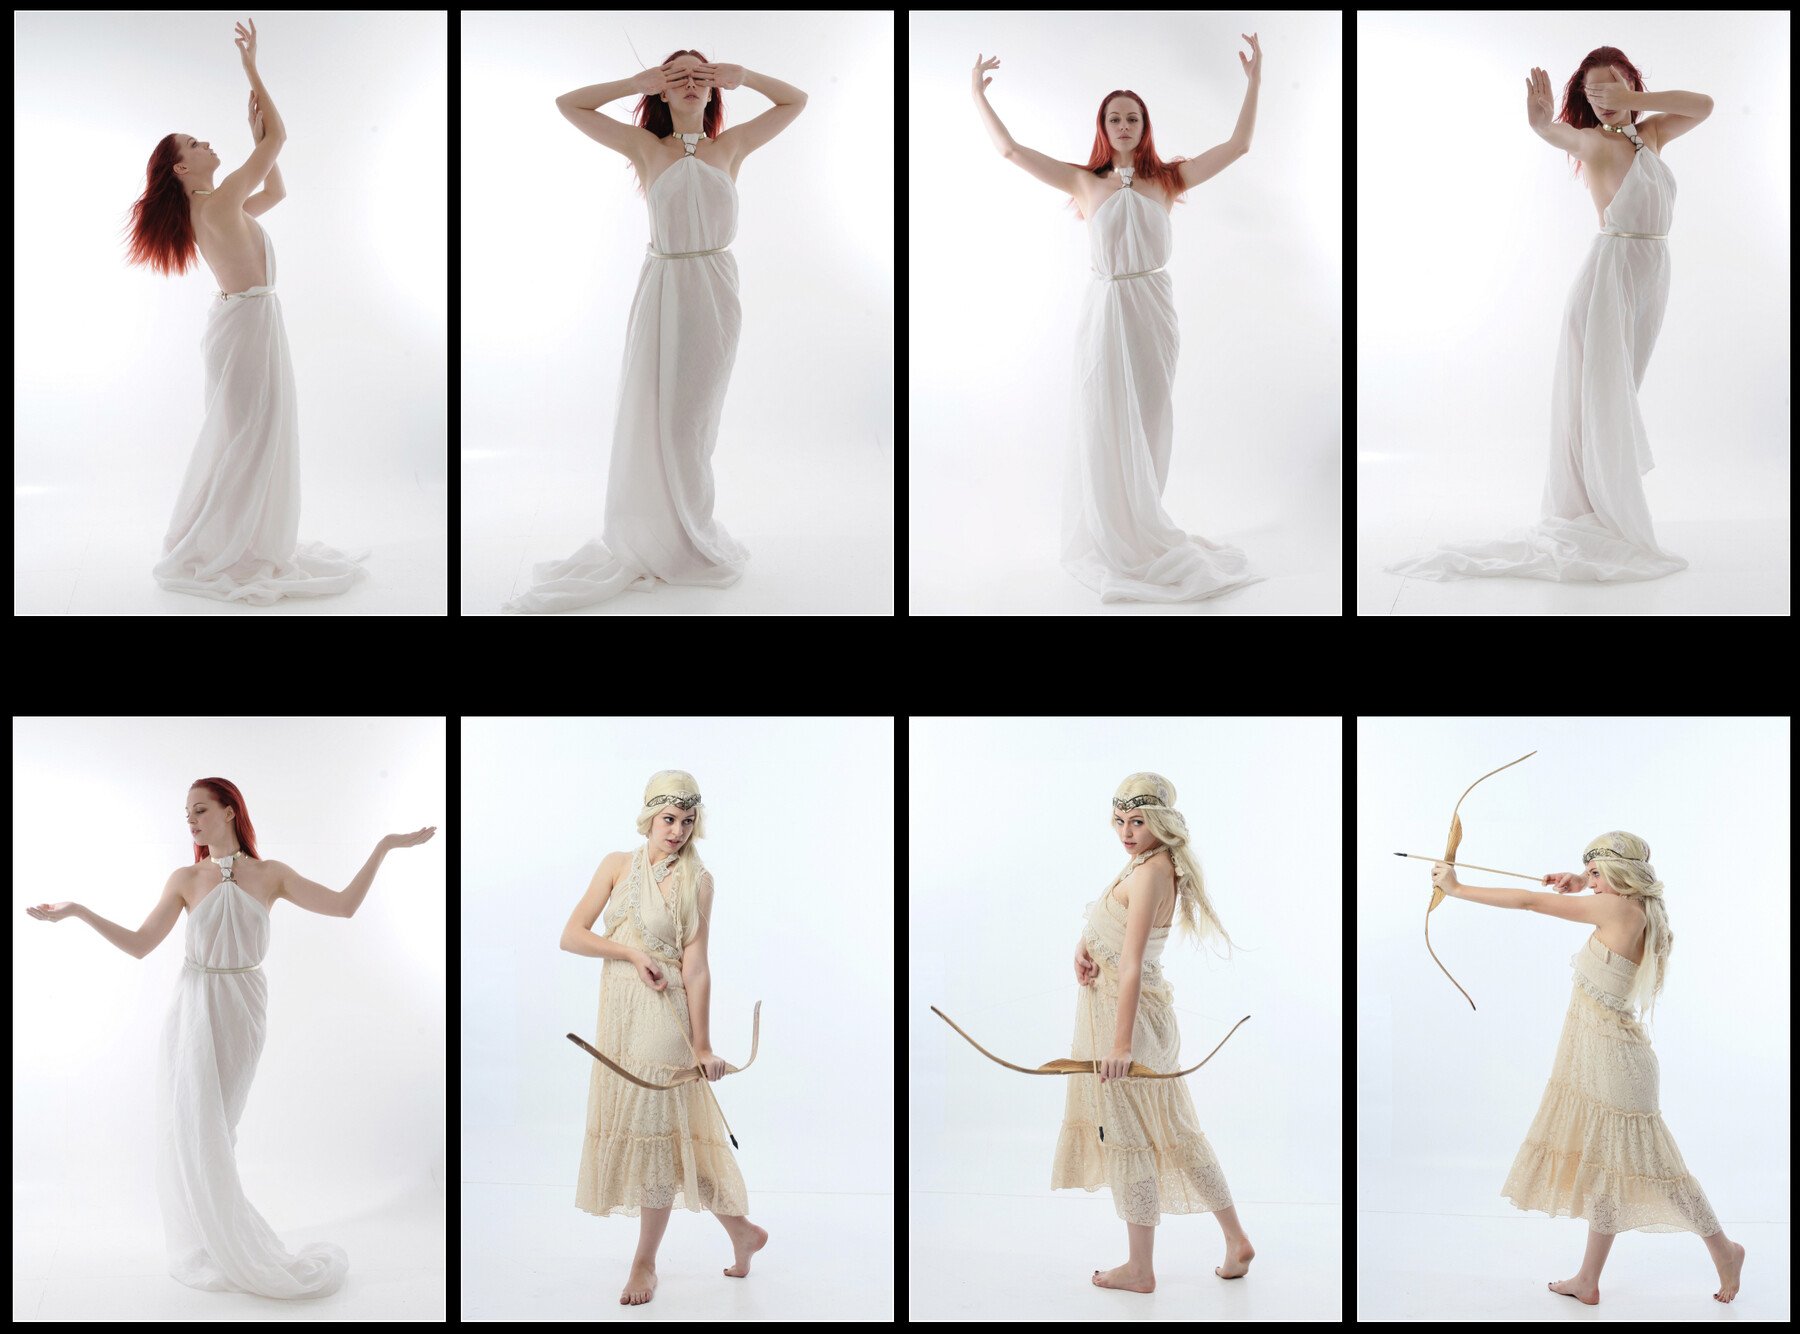 ArtStation x152 Grecian Goddess Pose Reference Pack Resources